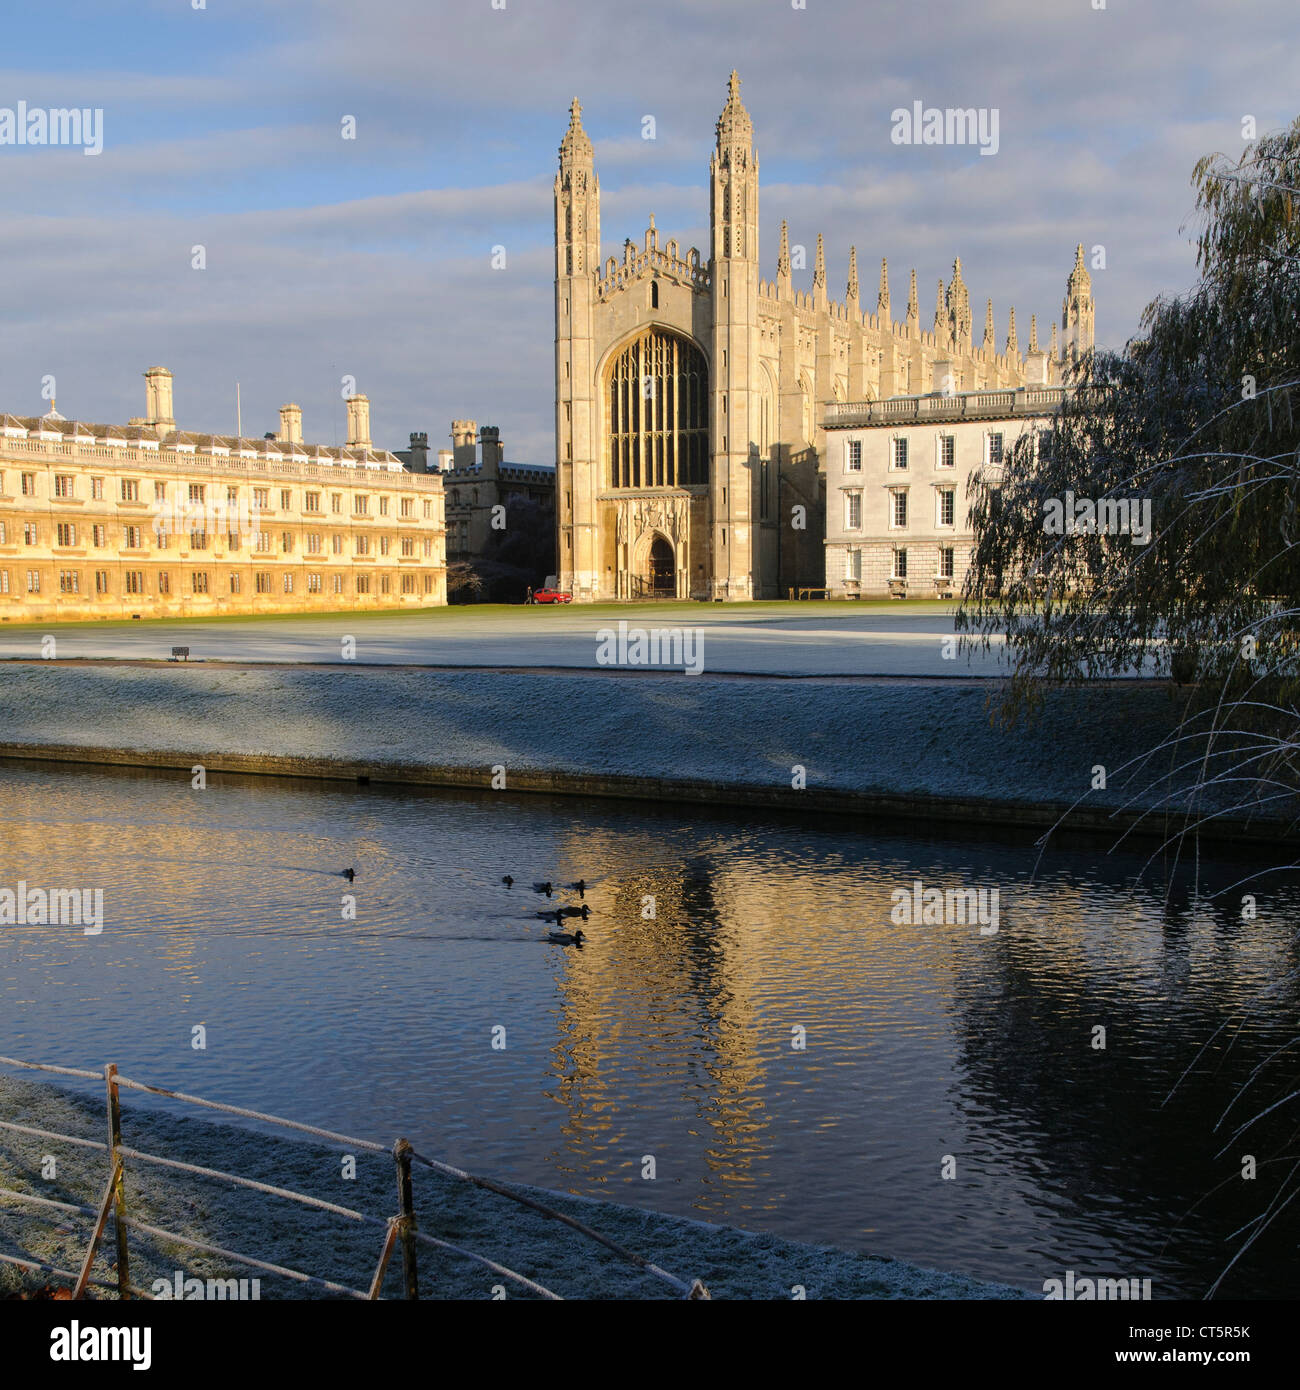 Clare College, King's Chapel and King's College with the River Cam flowing past in the foreground on a frosty winter's day. Stock Photo